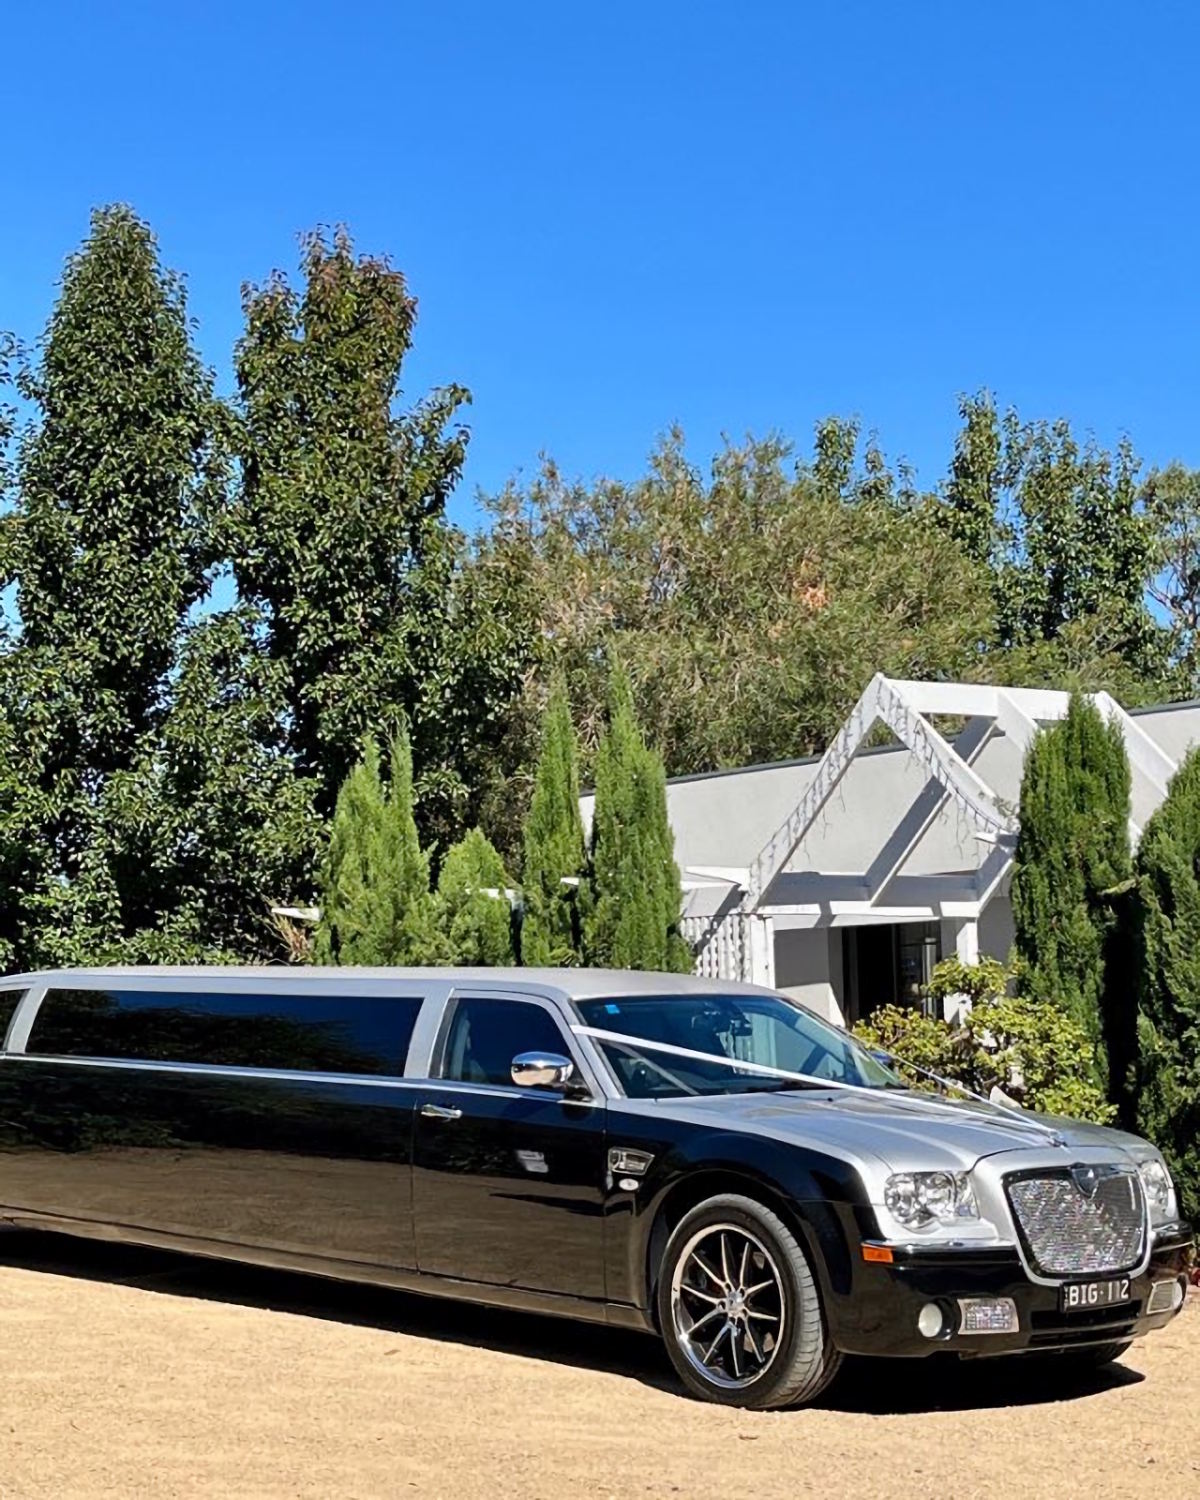 Dalywaters Rose Garden and Wedding Chapel Limo